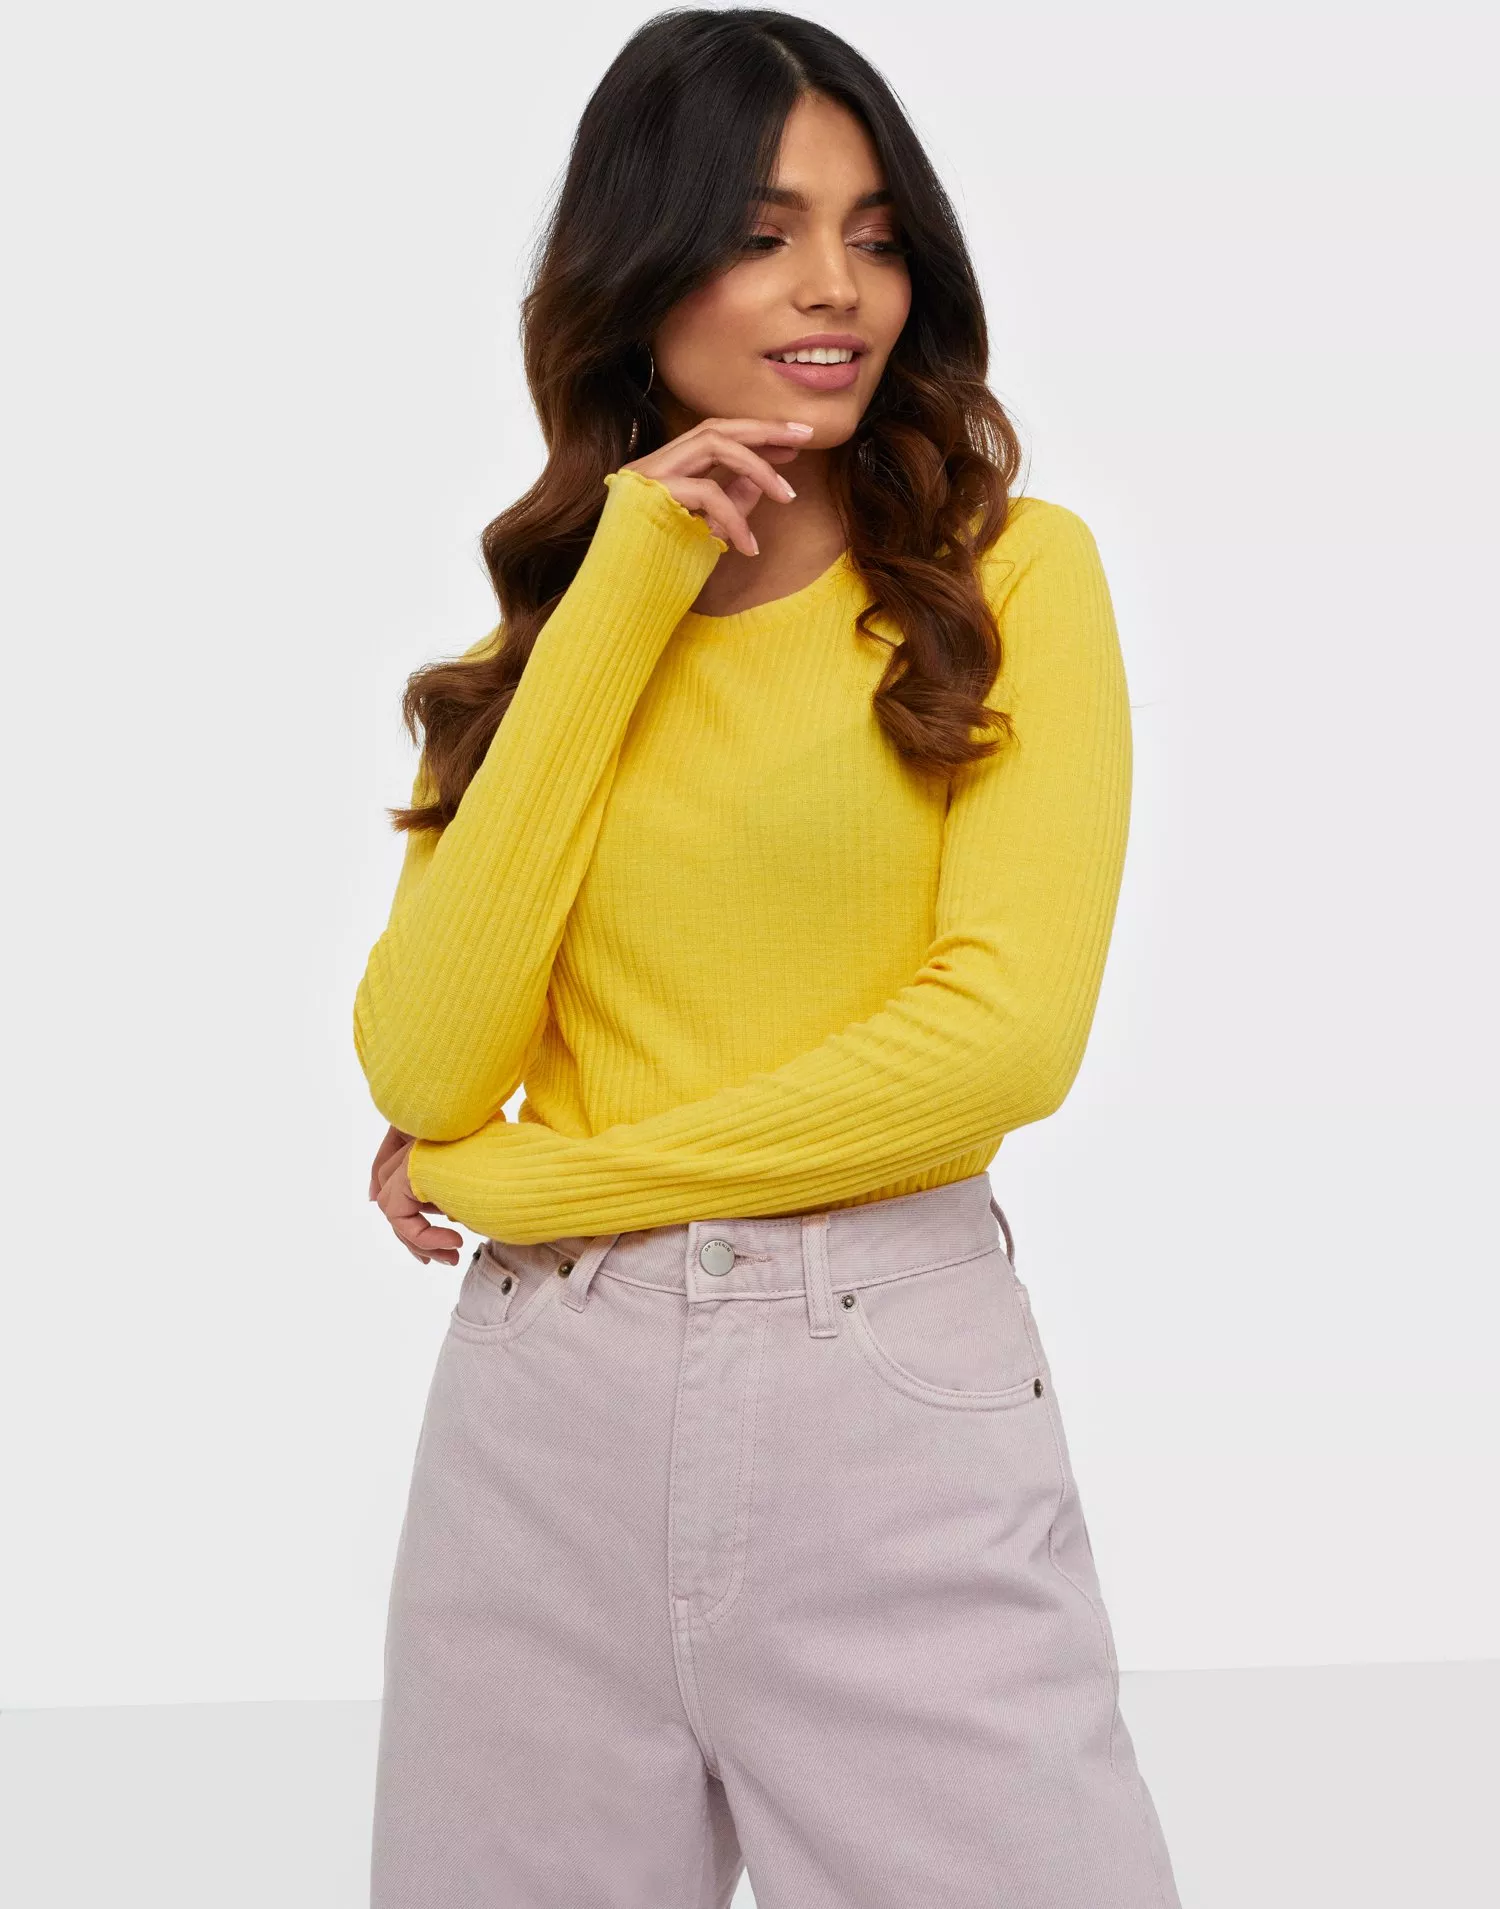 - Buy L/S ONLNELLA Only Light TOP Yellow O-NECK JRS